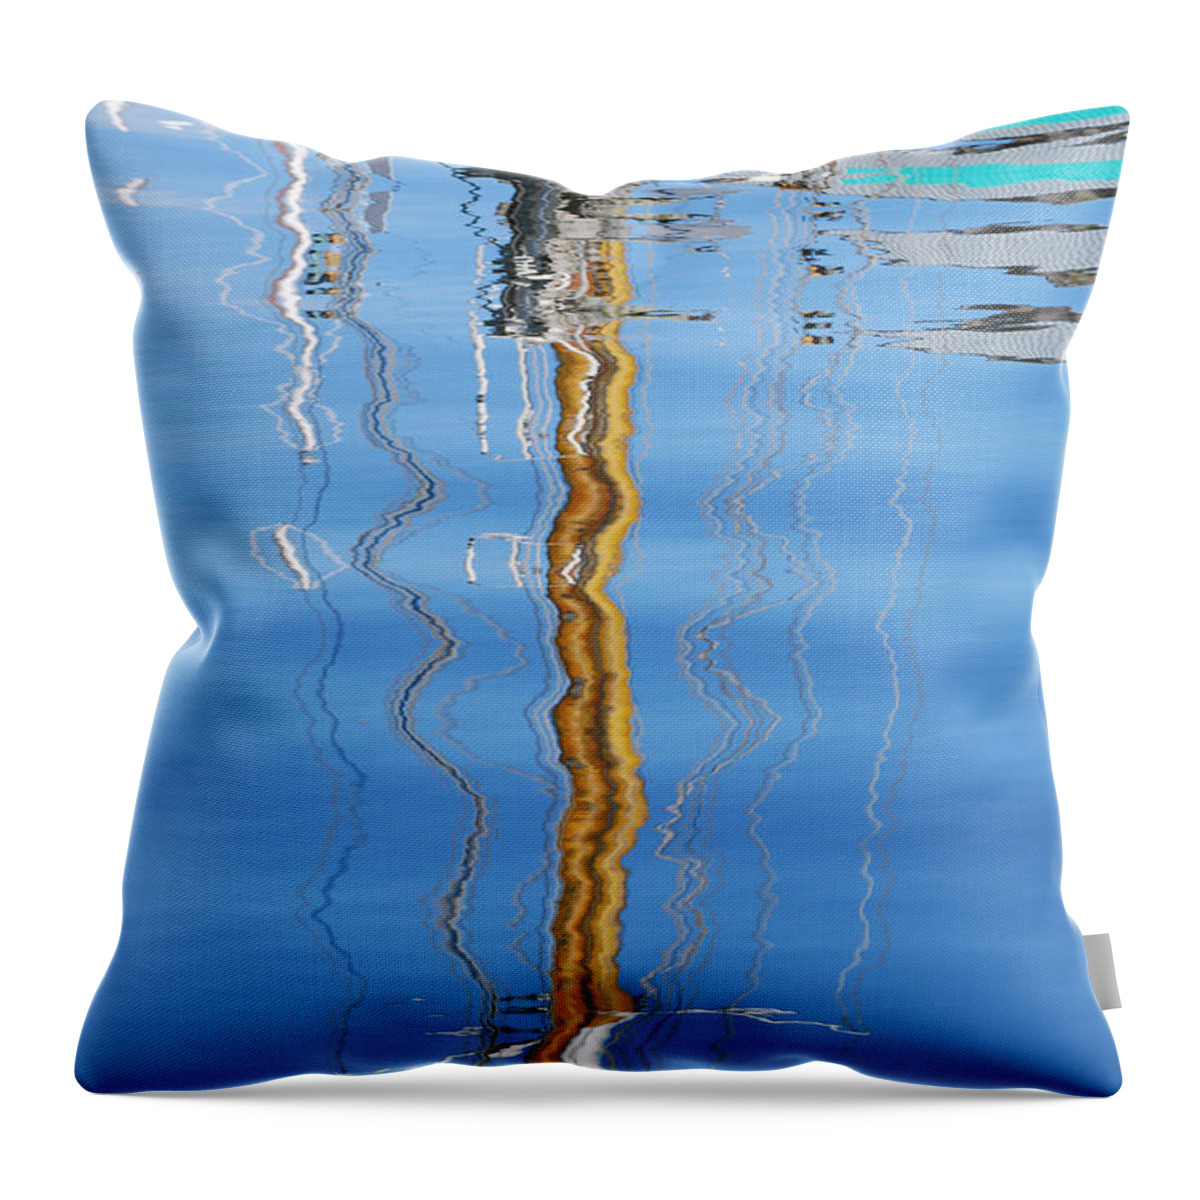 Sailboat Throw Pillow featuring the photograph Sailboat Reflection by Jani Freimann